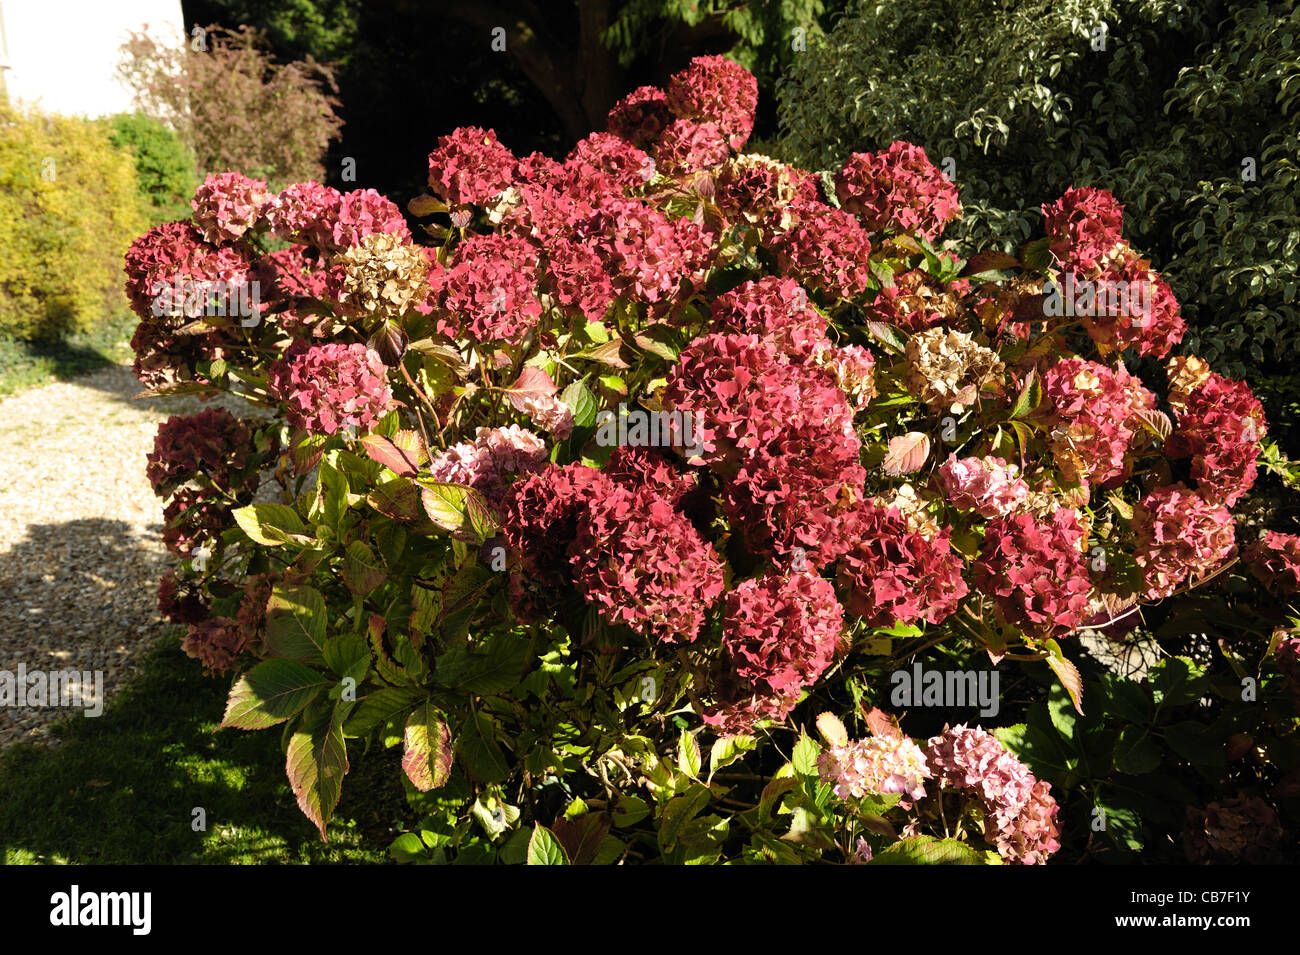 Old red flowerheads of Hydrangea macrophylla in autumn Stock Photo